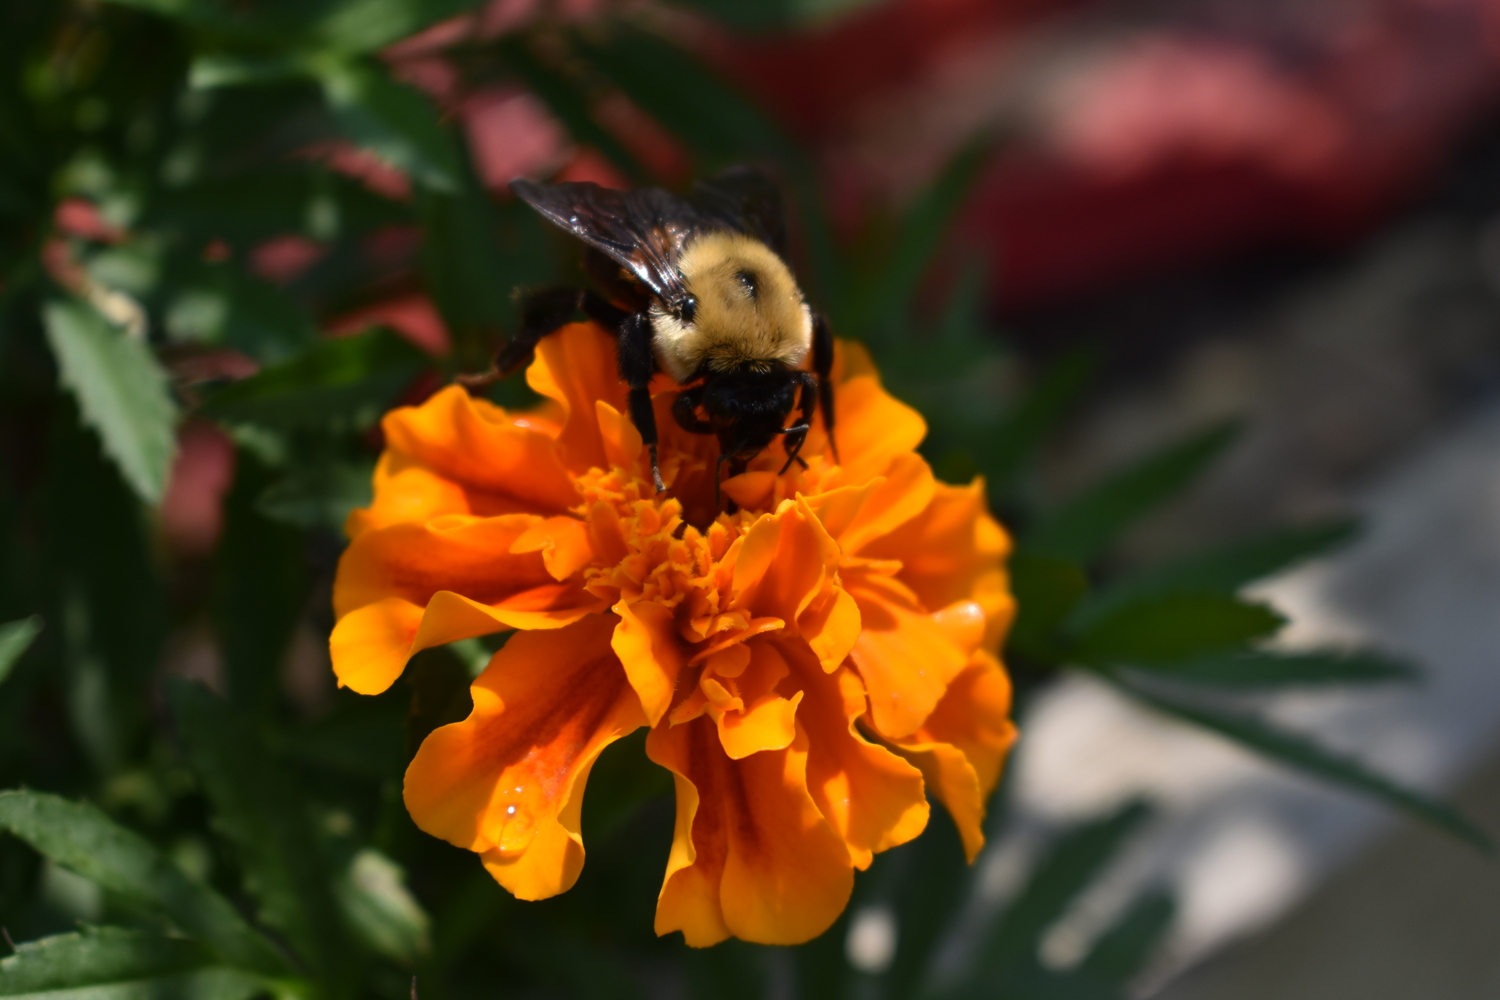 Neonics poison pollen and nectar that bees and other pollinators ingest.  BRENDAN J. O'REILLY